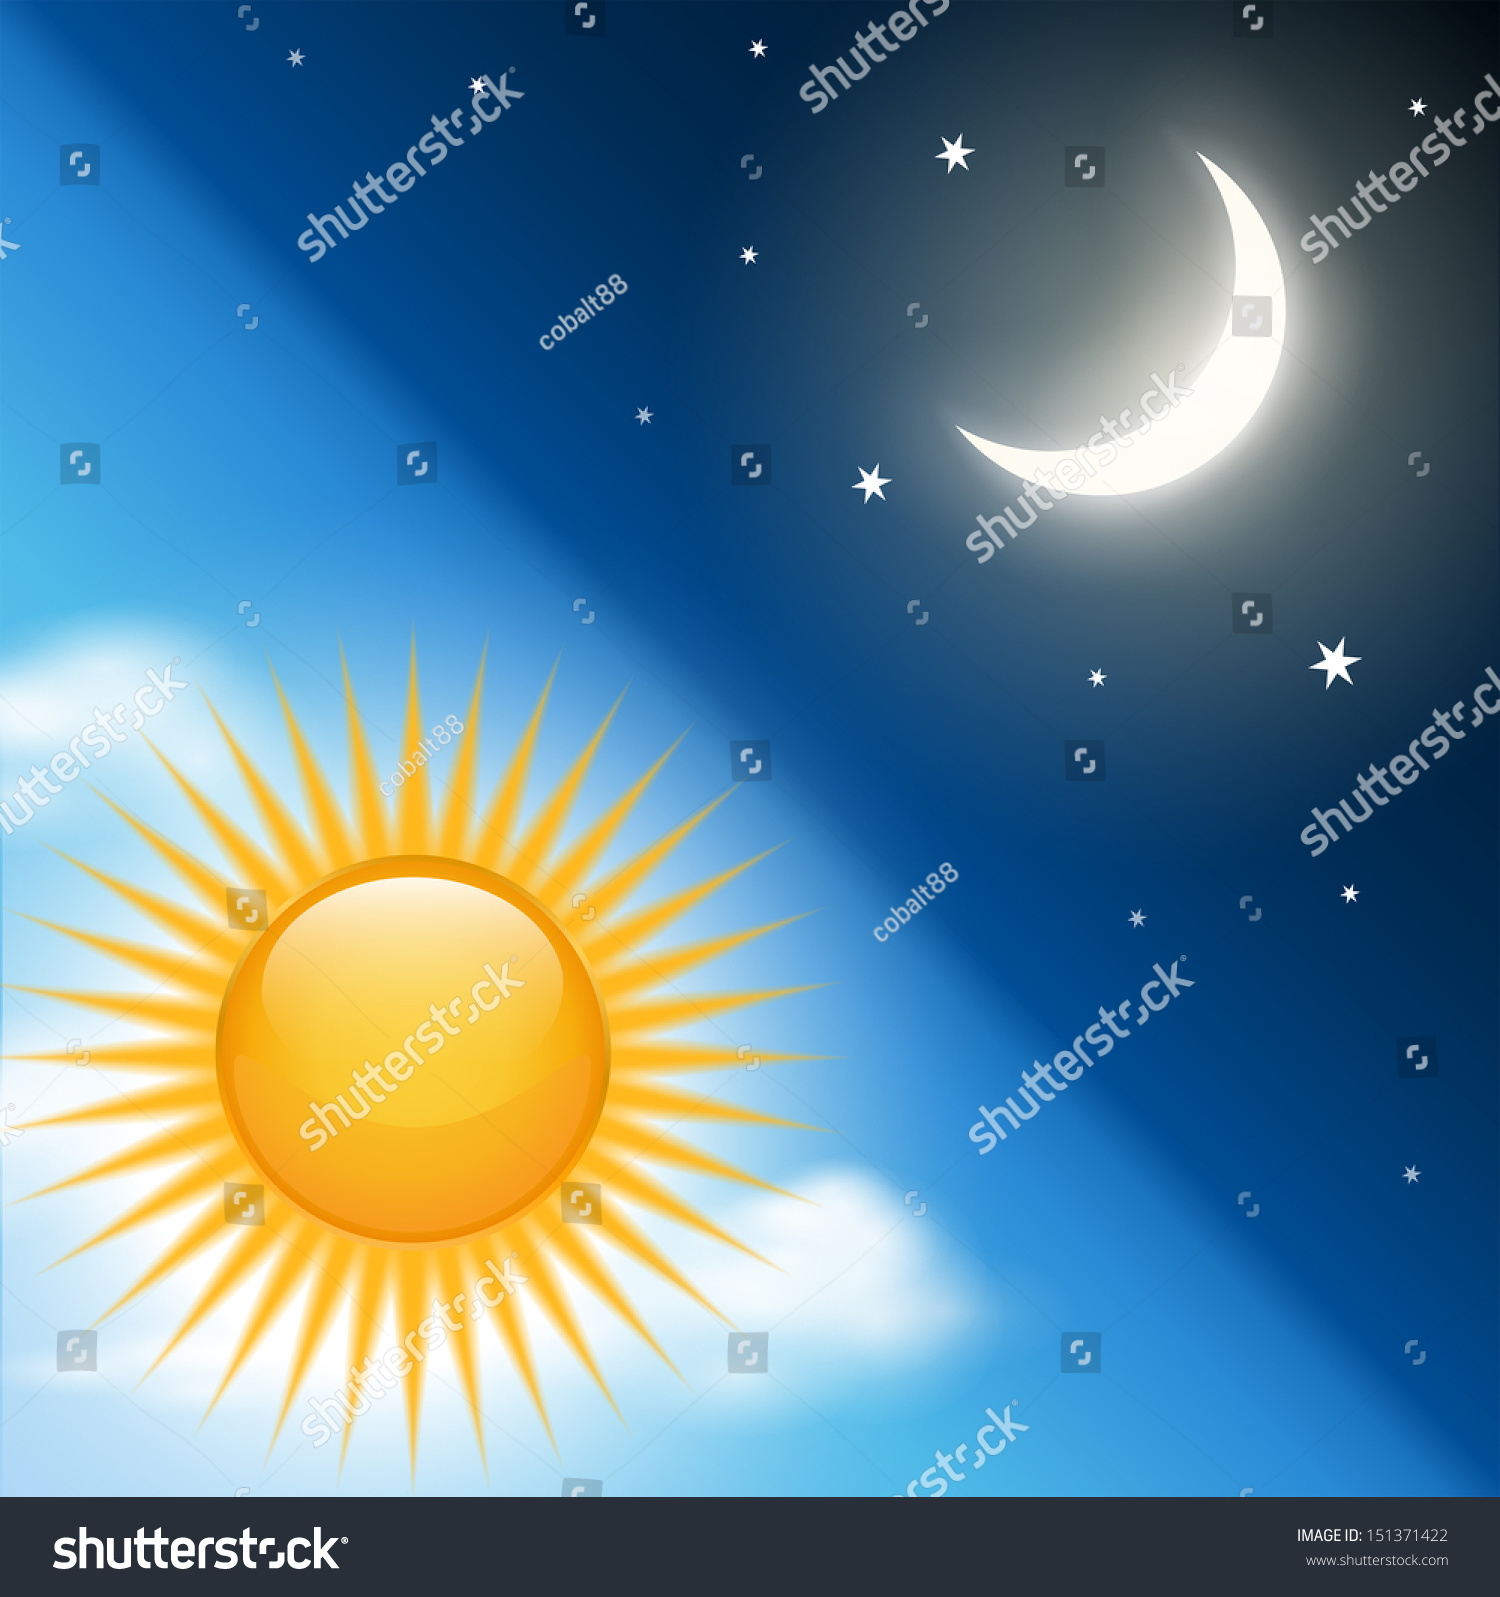 Background Vector Day Night Theme Stock Vector (Royalty Free) 151371422